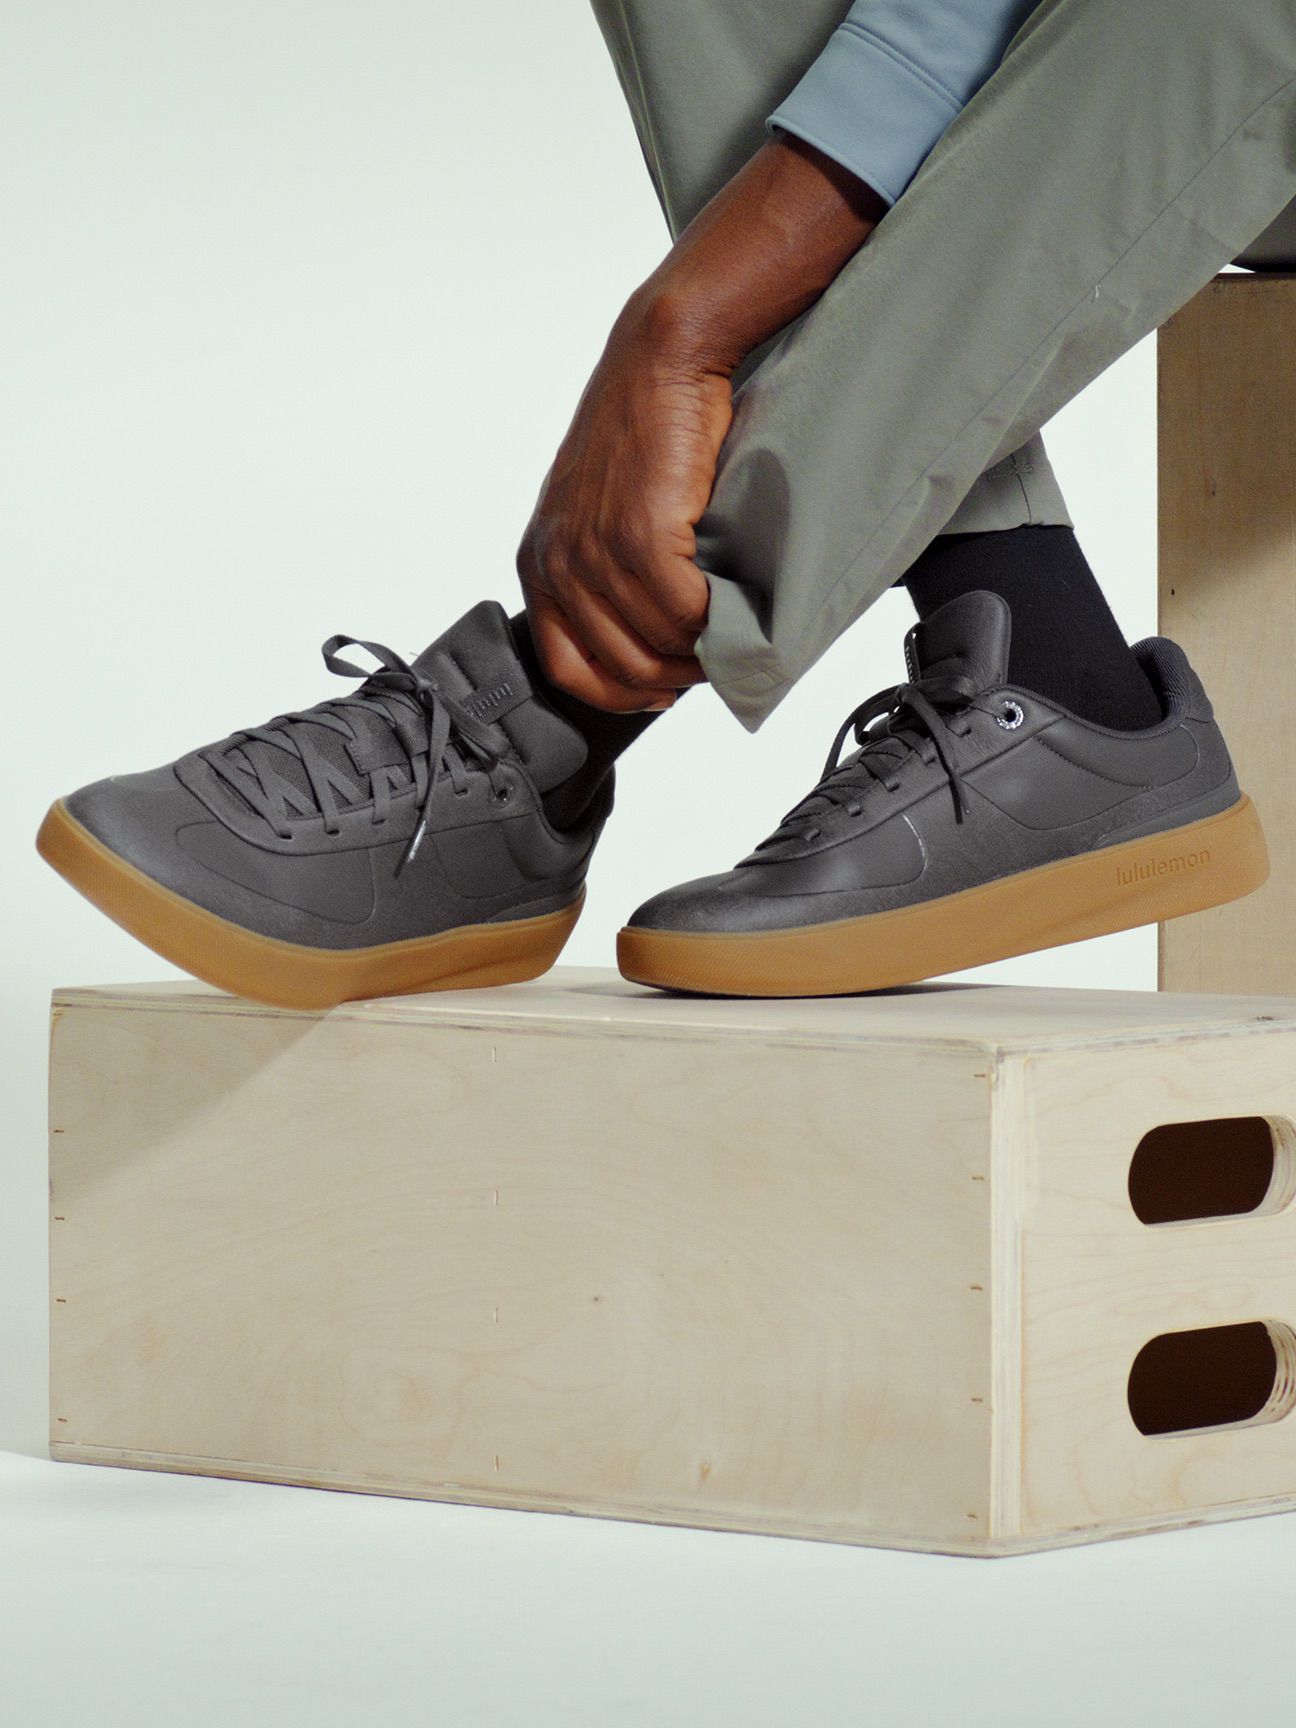 lululemon new Cityverse sneakers: Where to buy latest addition to 'star  lineup' 